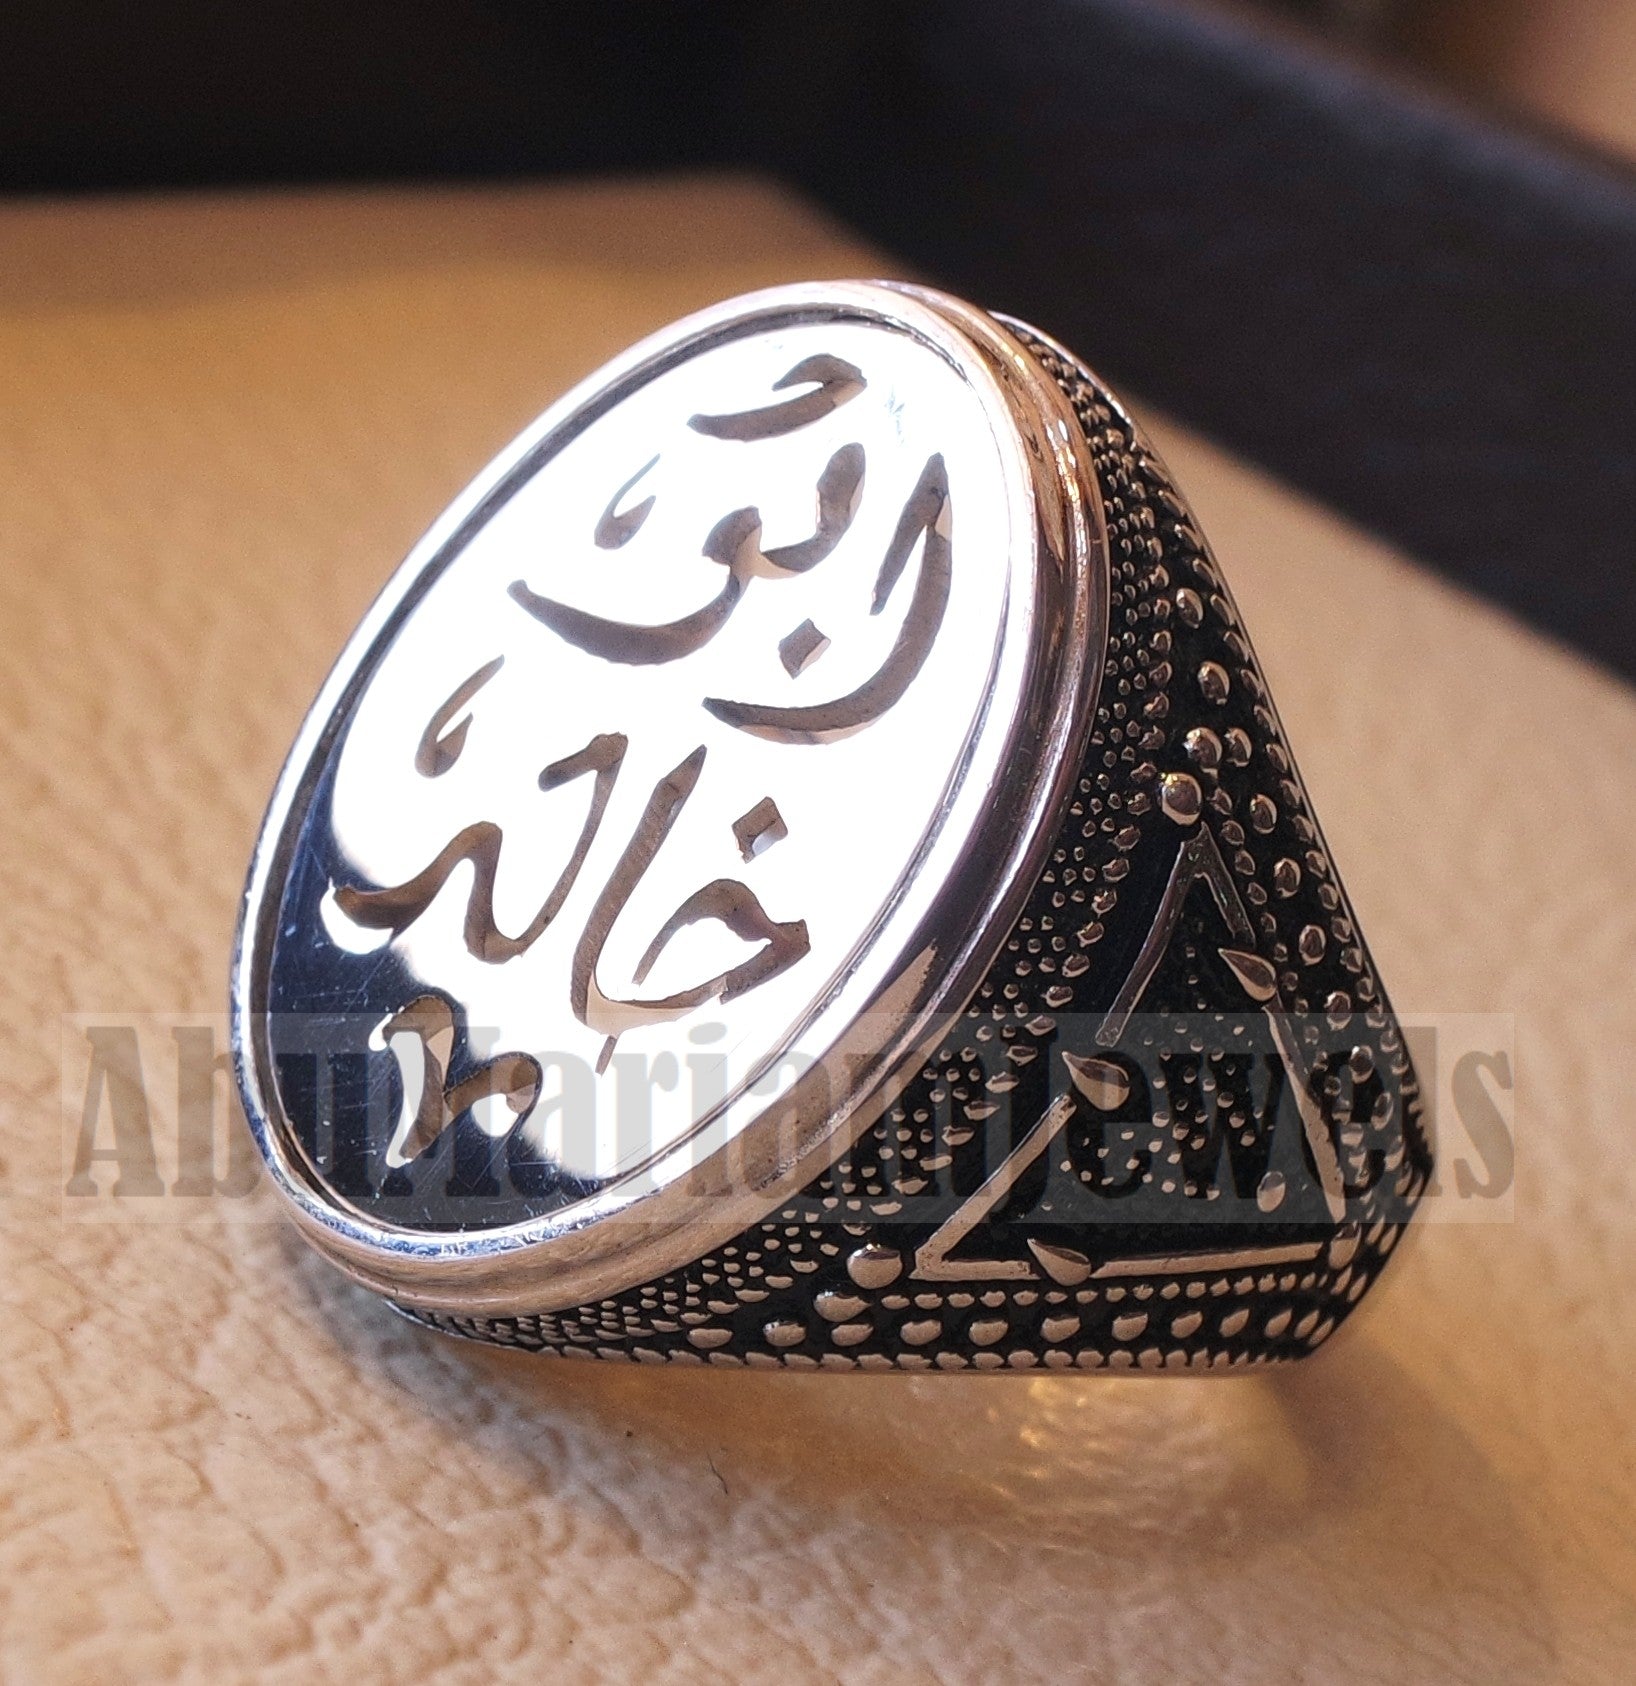 Customized Arabic calligraphy names ring personalized jewelry style sterling silver 925  any size TSN1003 خاتم اسم تفصيل